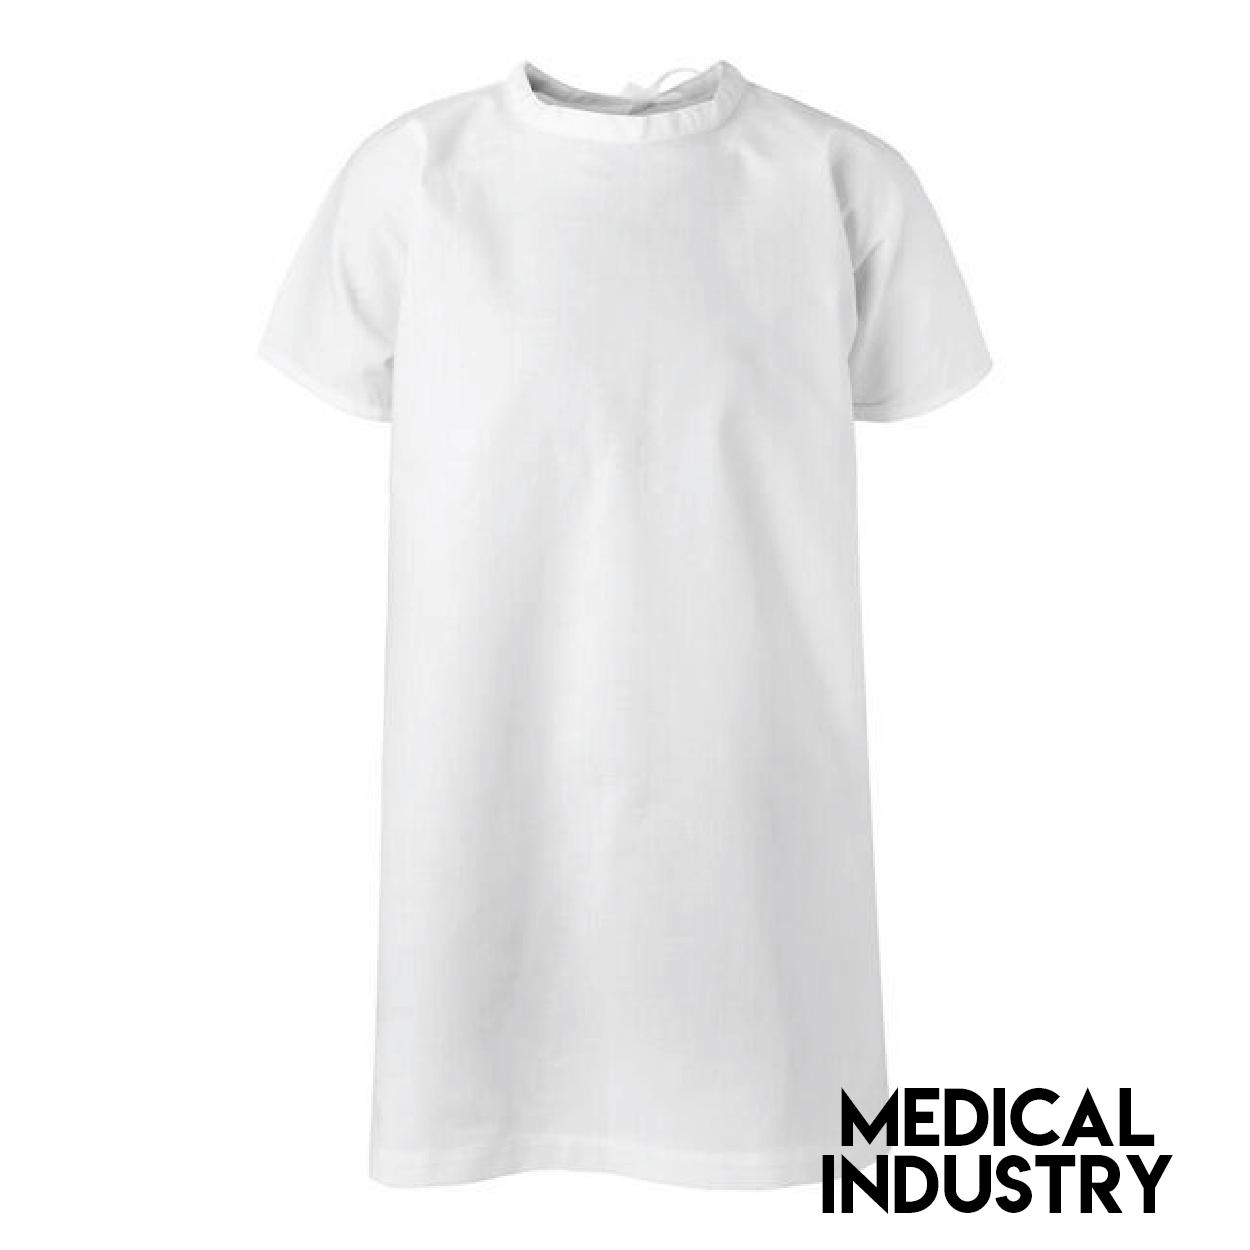 Medical Industry